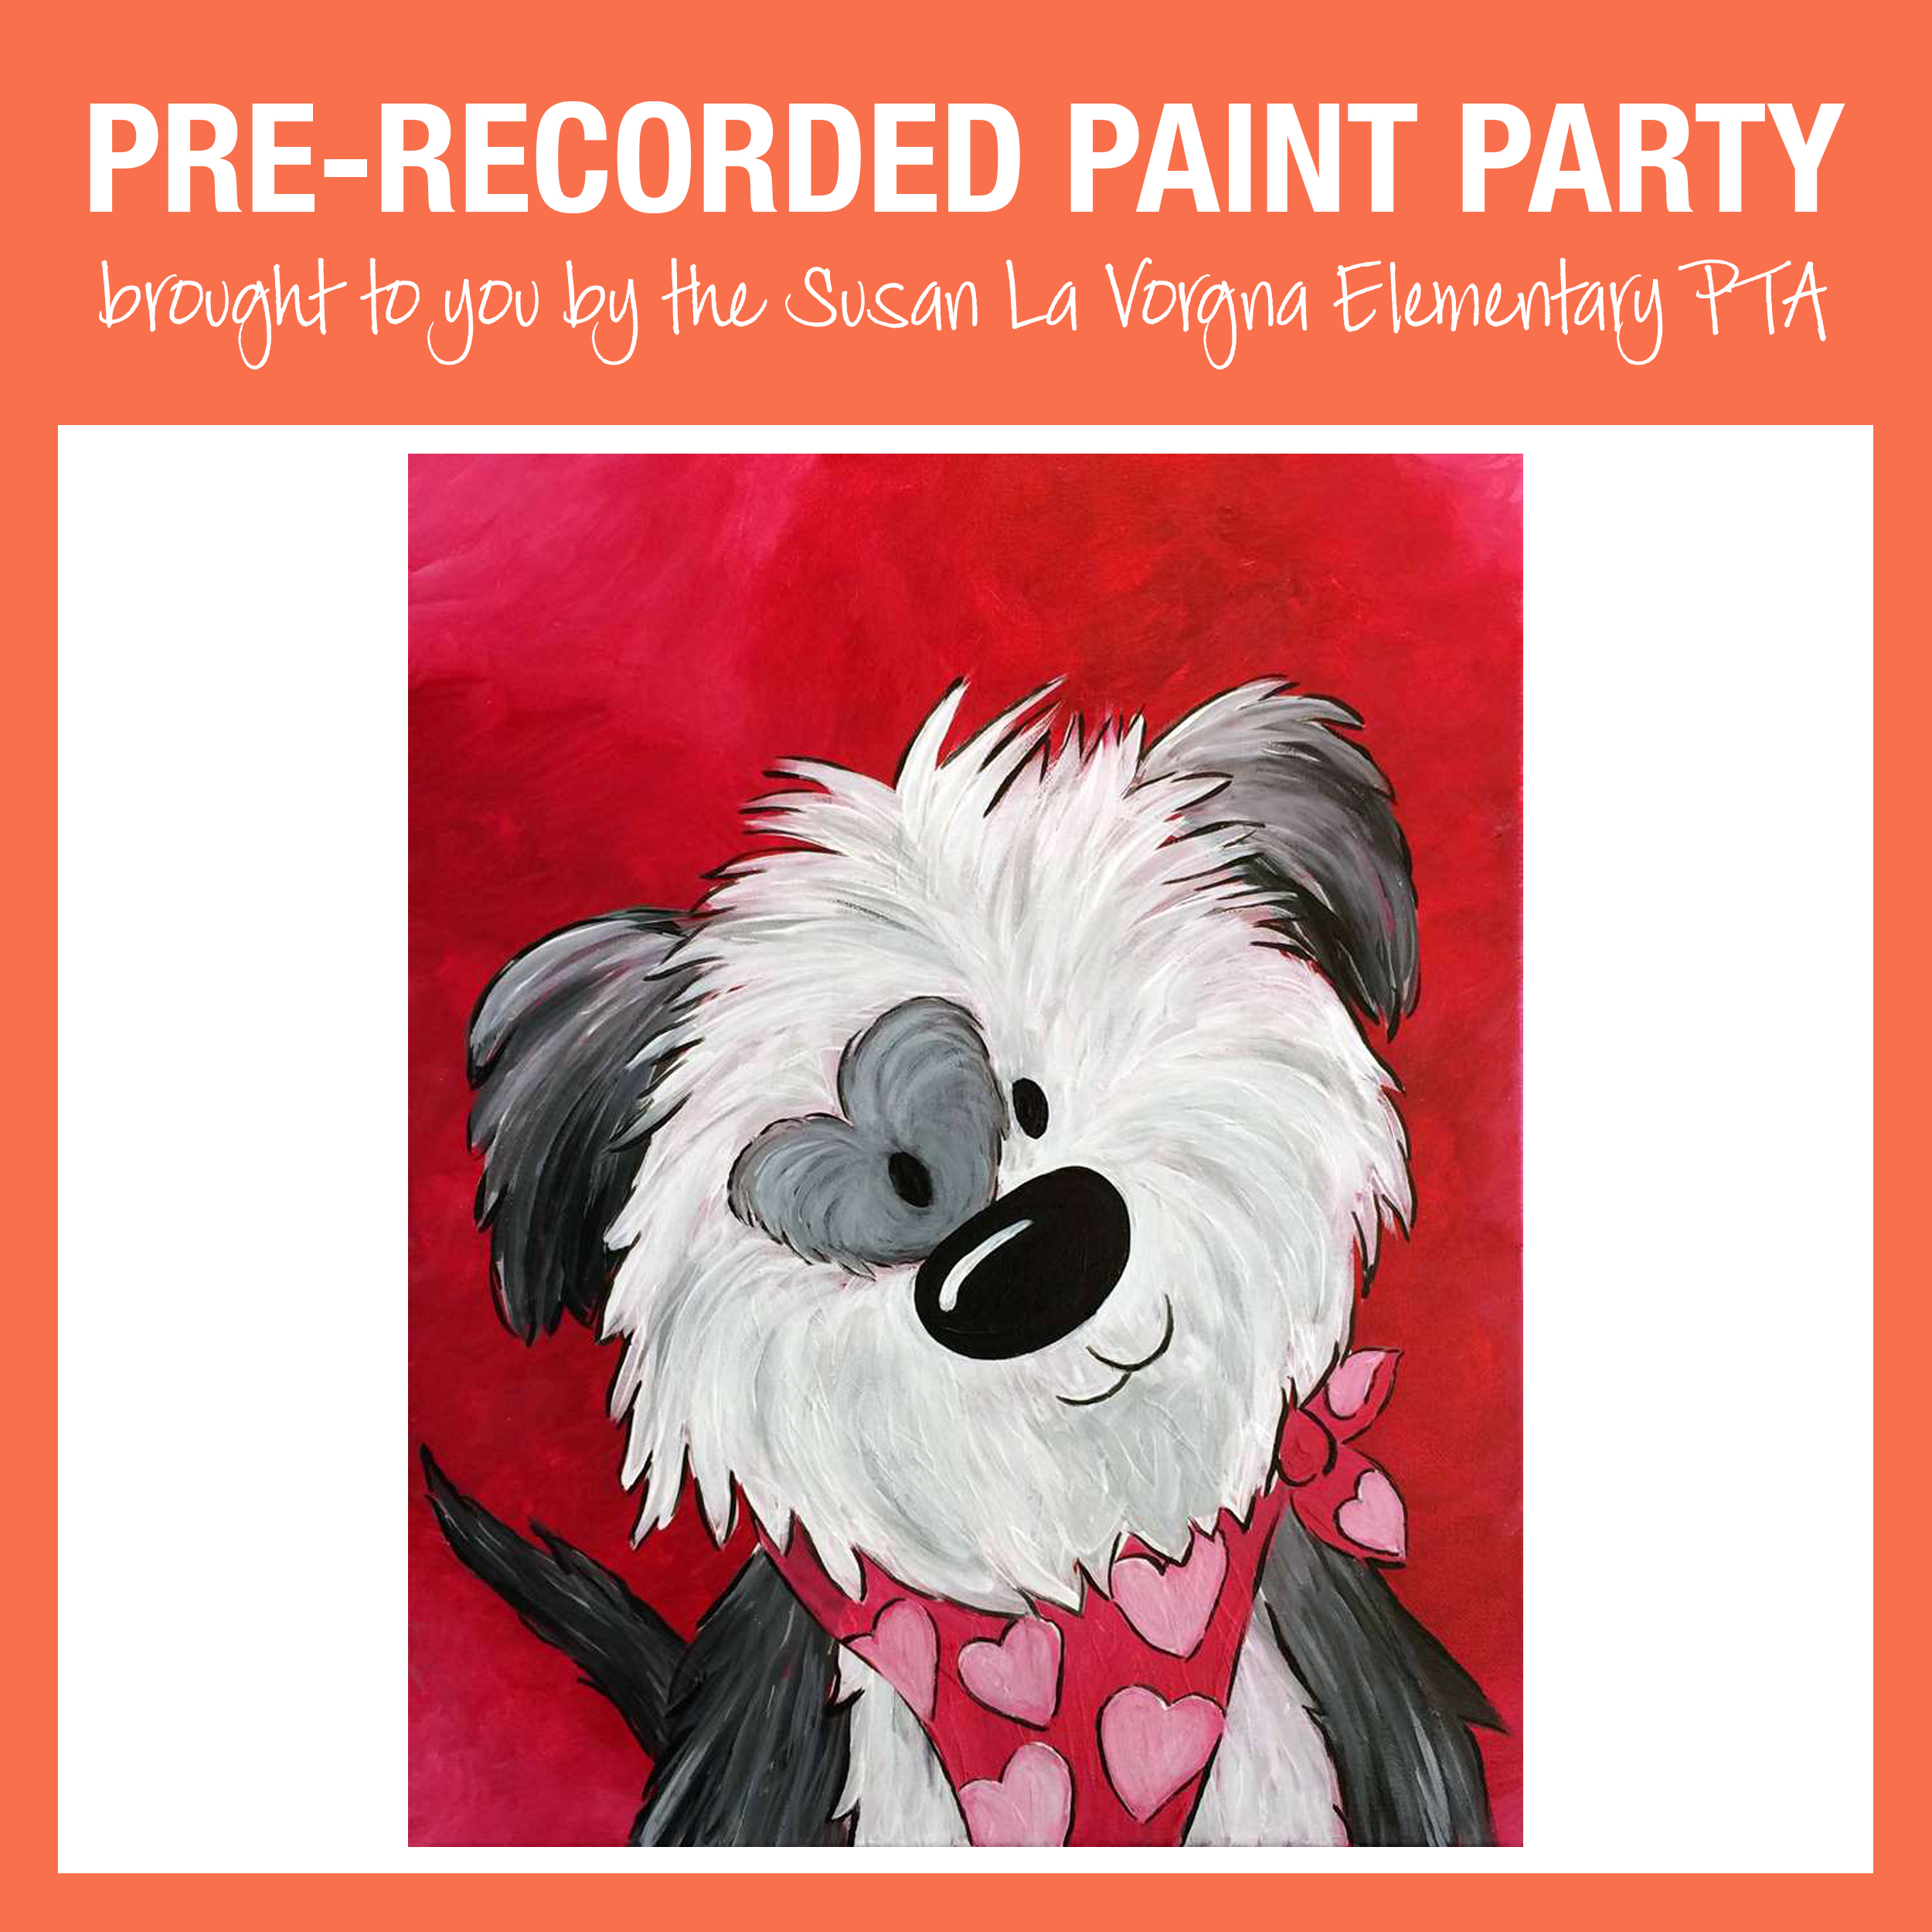 Pre-recorded Paint Party Video